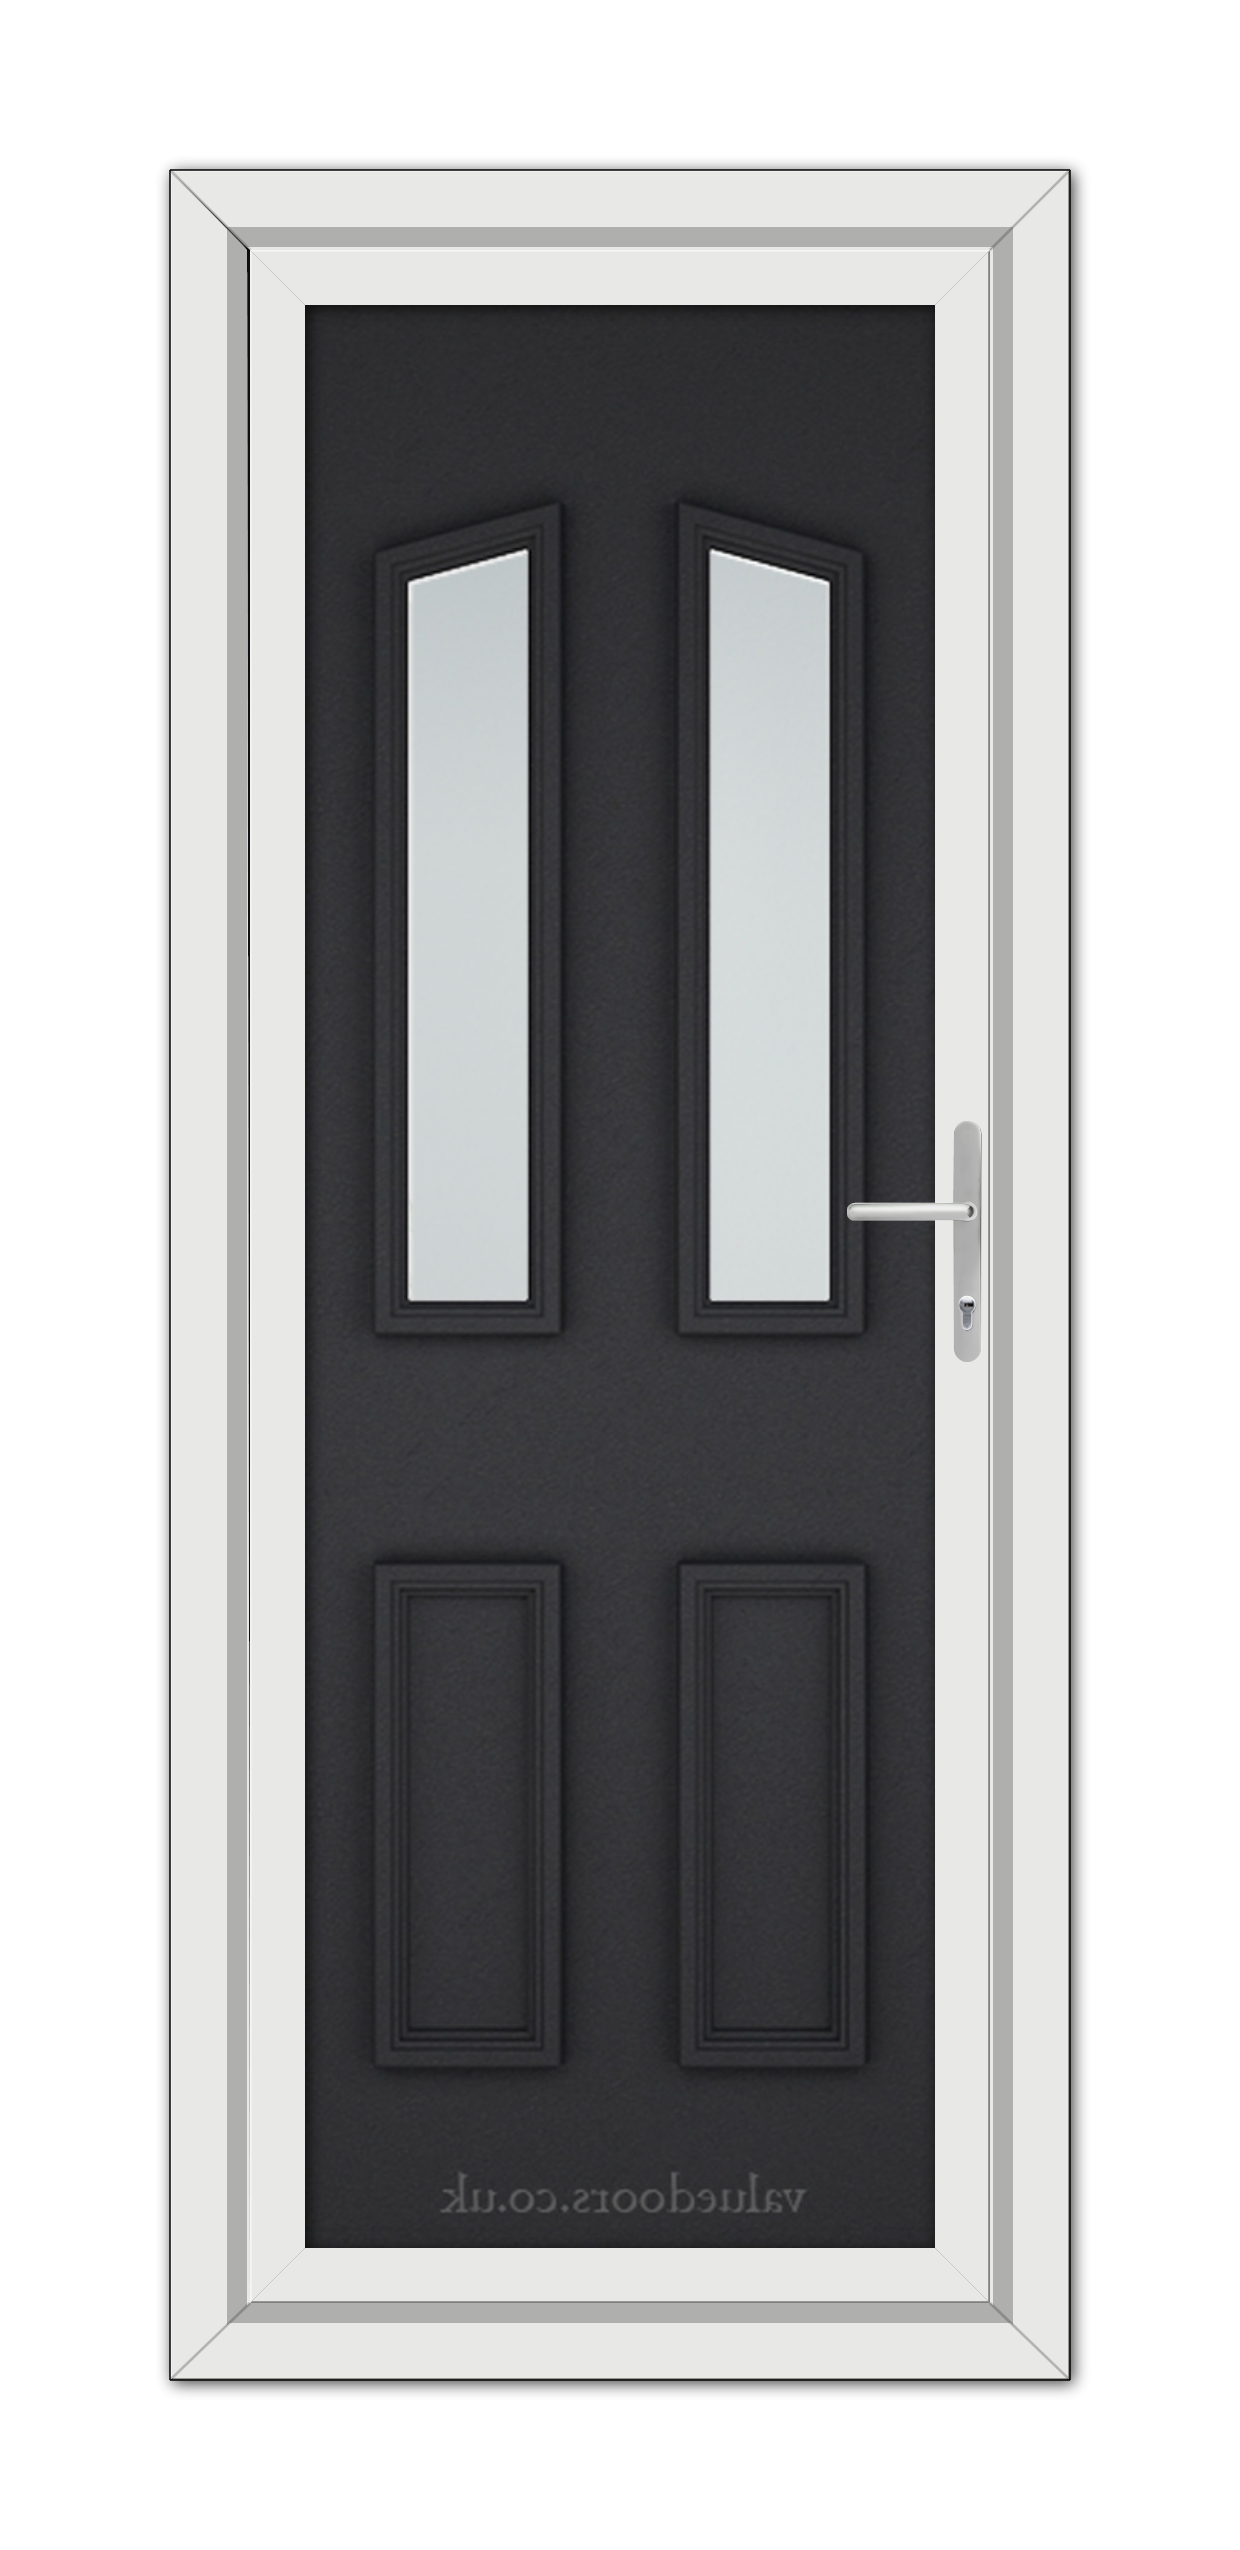 Modern black brown Kensington uPVC front door with two vertical glass panels and a silver handle, surrounded by a white frame.